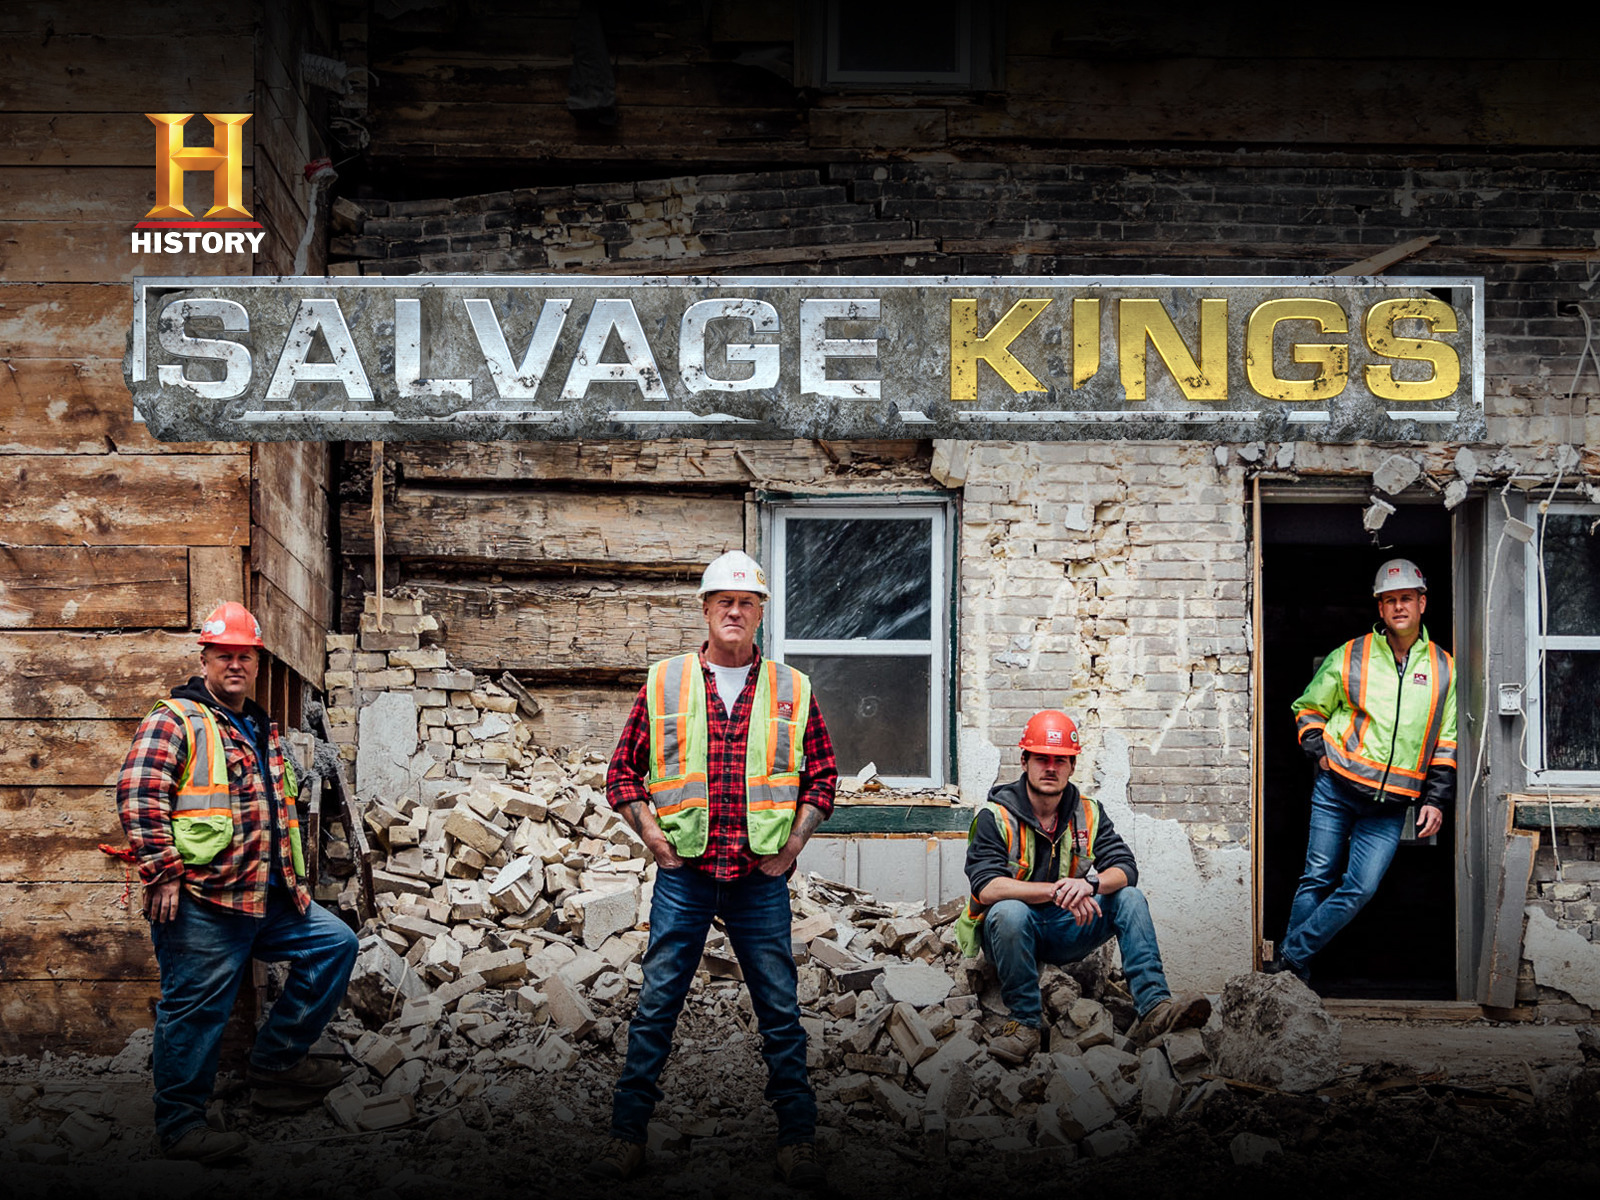 Promotional image of Salvage Kings on History Channel with men in work gear in front of brick wall